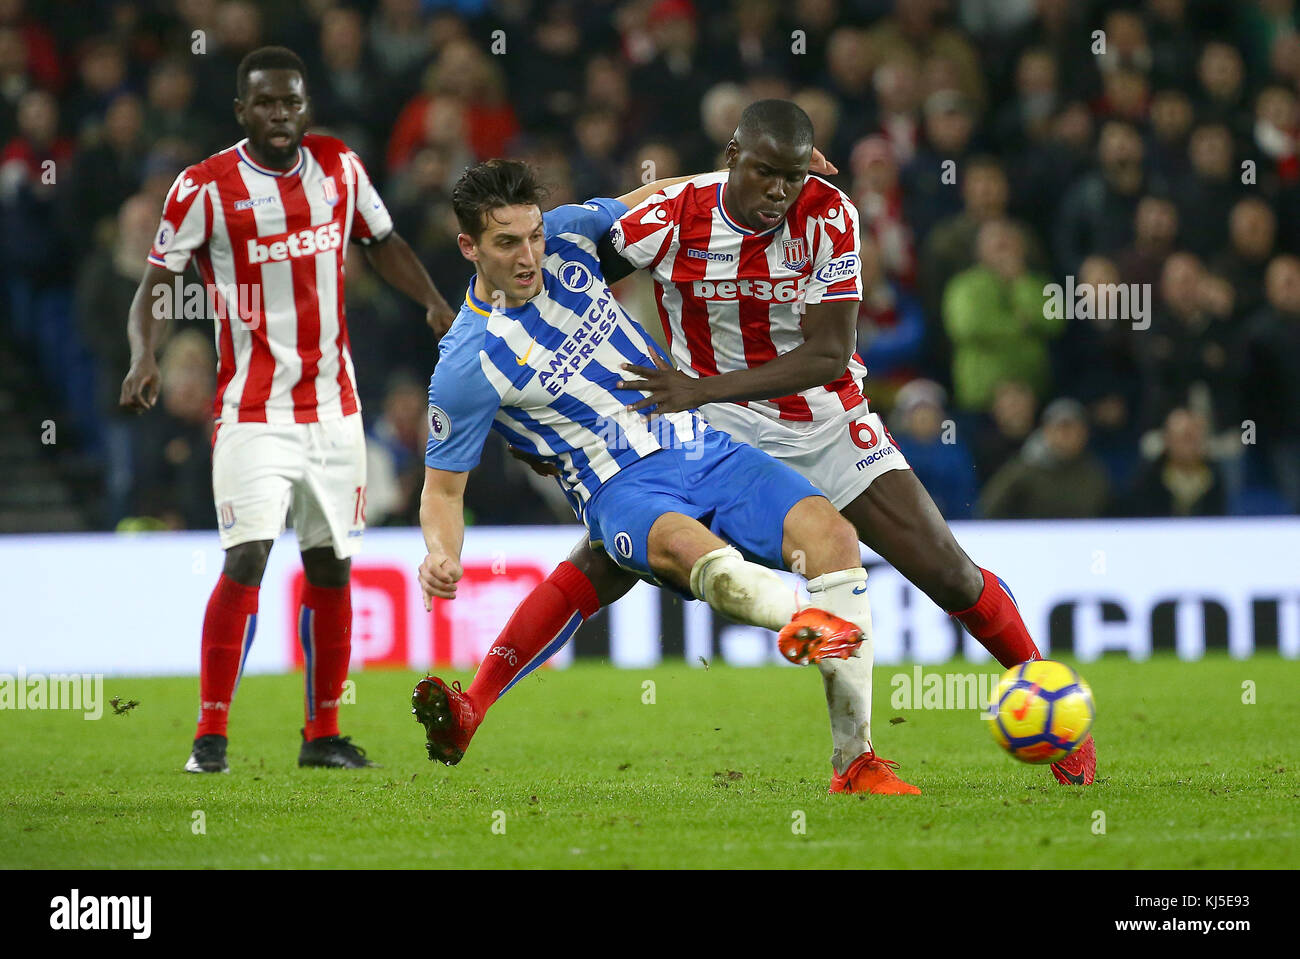 Kurt Zouma tackles Lewis Dunk of Brighton during the Premier League match between Brighton and Hove Albion and Stoke City at the American Express Community Stadium in Brighton and Hove. 20 Nov 2017. **** EDITORIAL USE ONLY ***  FA Premier League and Football League images are subject to DataCo Licence see www.football-dataco.com Stock Photo